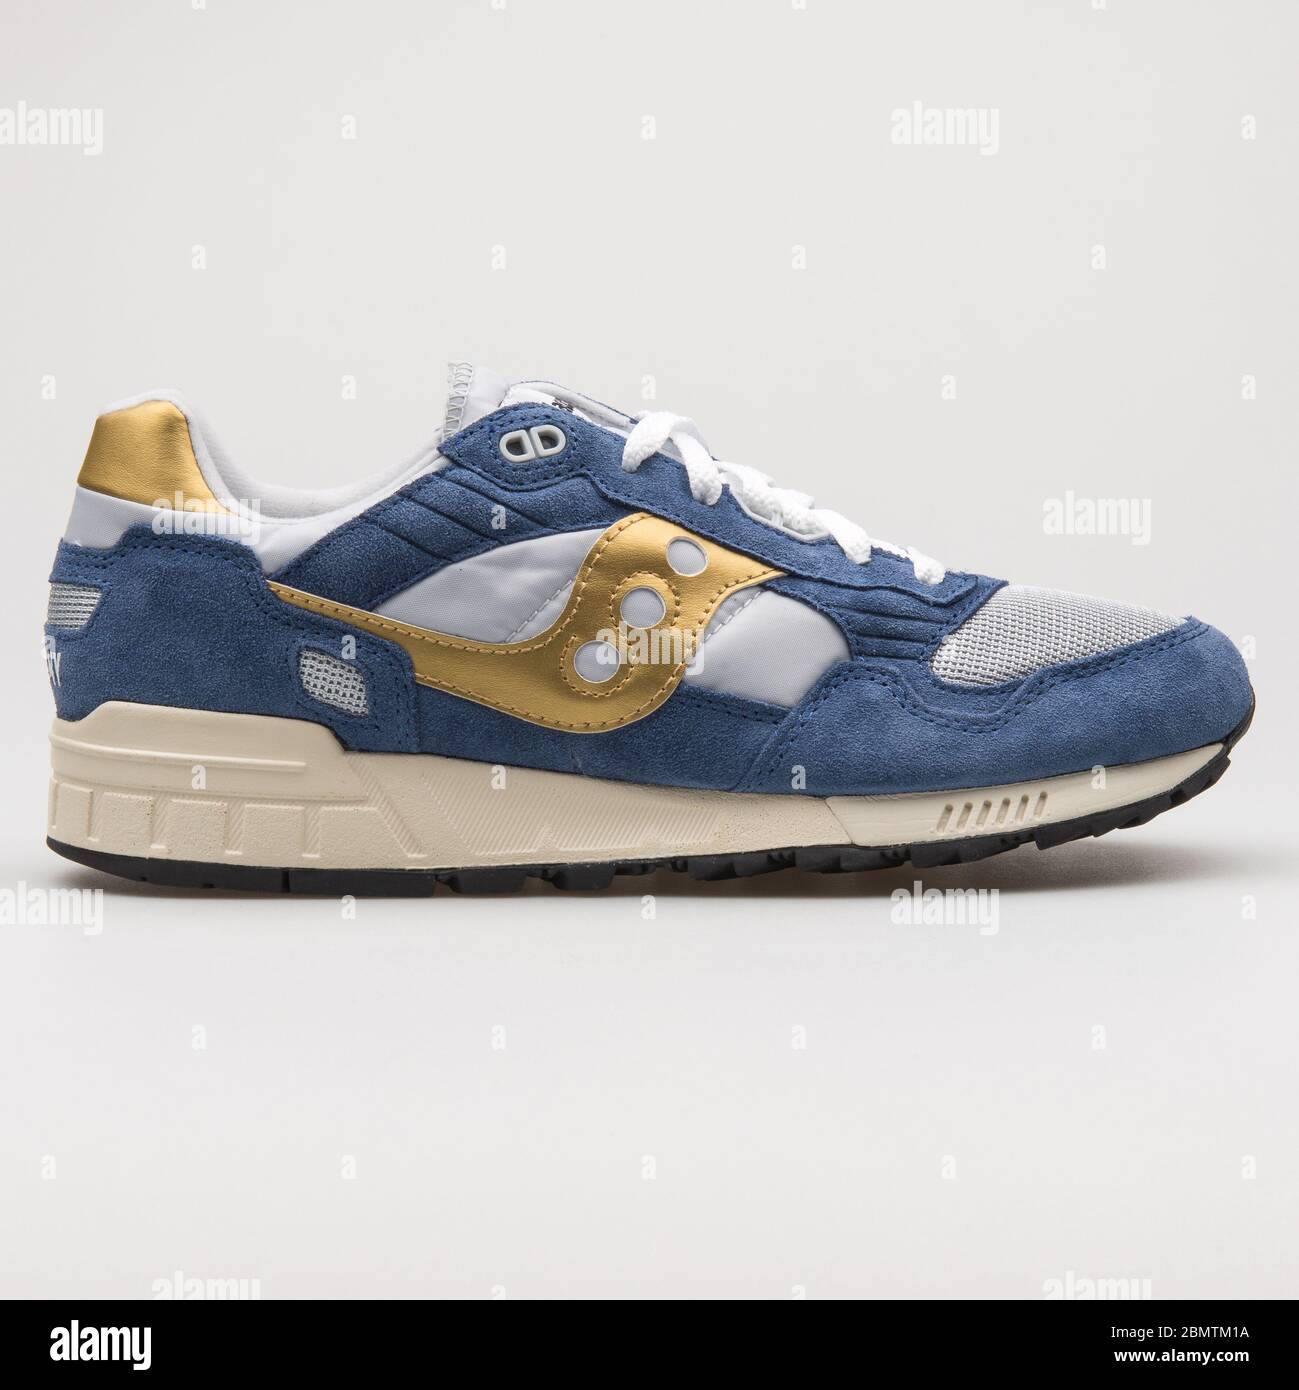 VIENNA, AUSTRIA - FEBRUARY 19, 2018: Saucony Shadow 5000 Vintage blue, gold  and grey sneaker on white background Stock Photo - Alamy